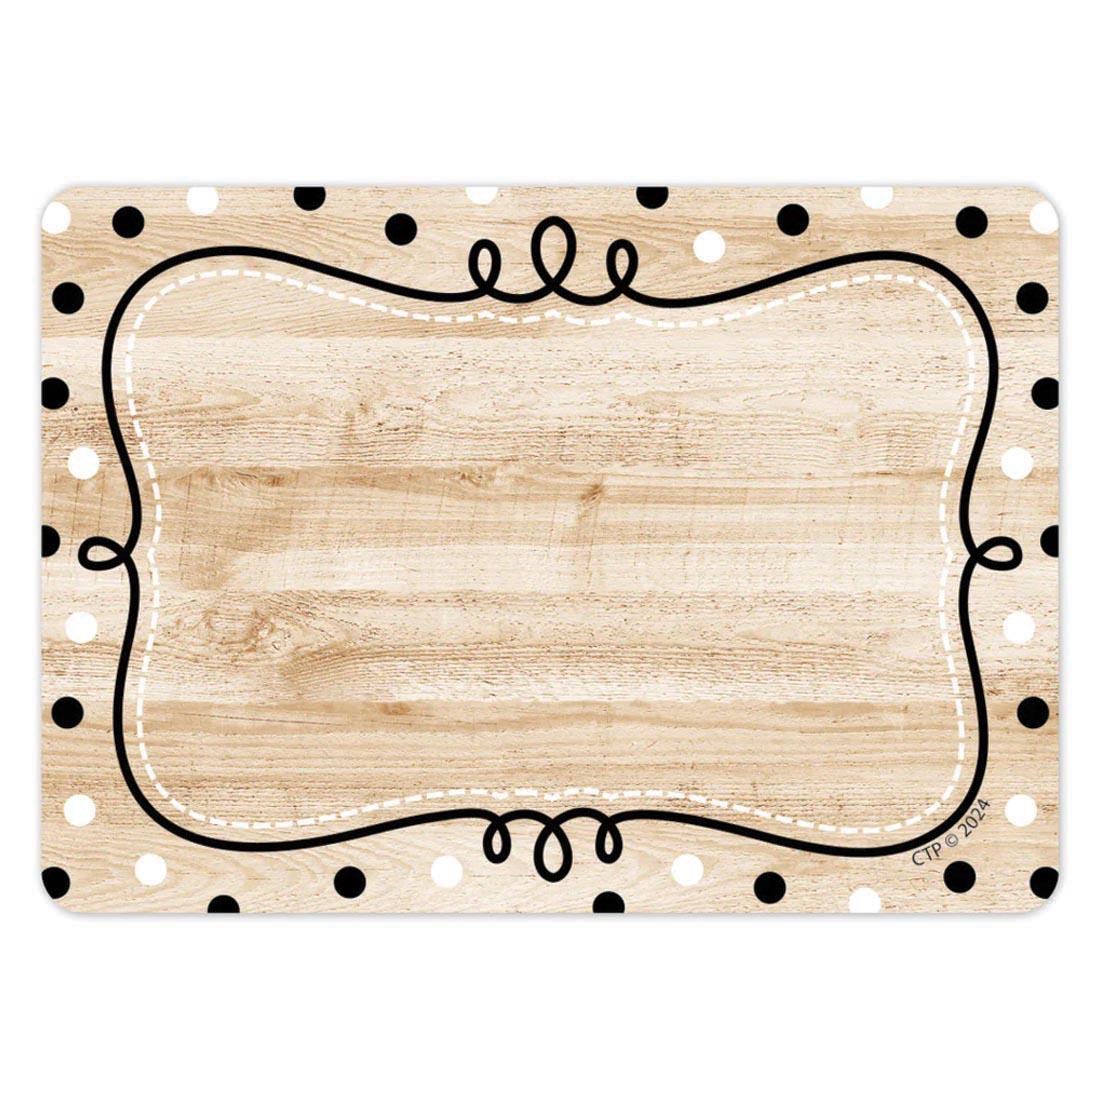 Loop-de-Dots on Wood Label from the Core Decor collection by Creative Teaching Press